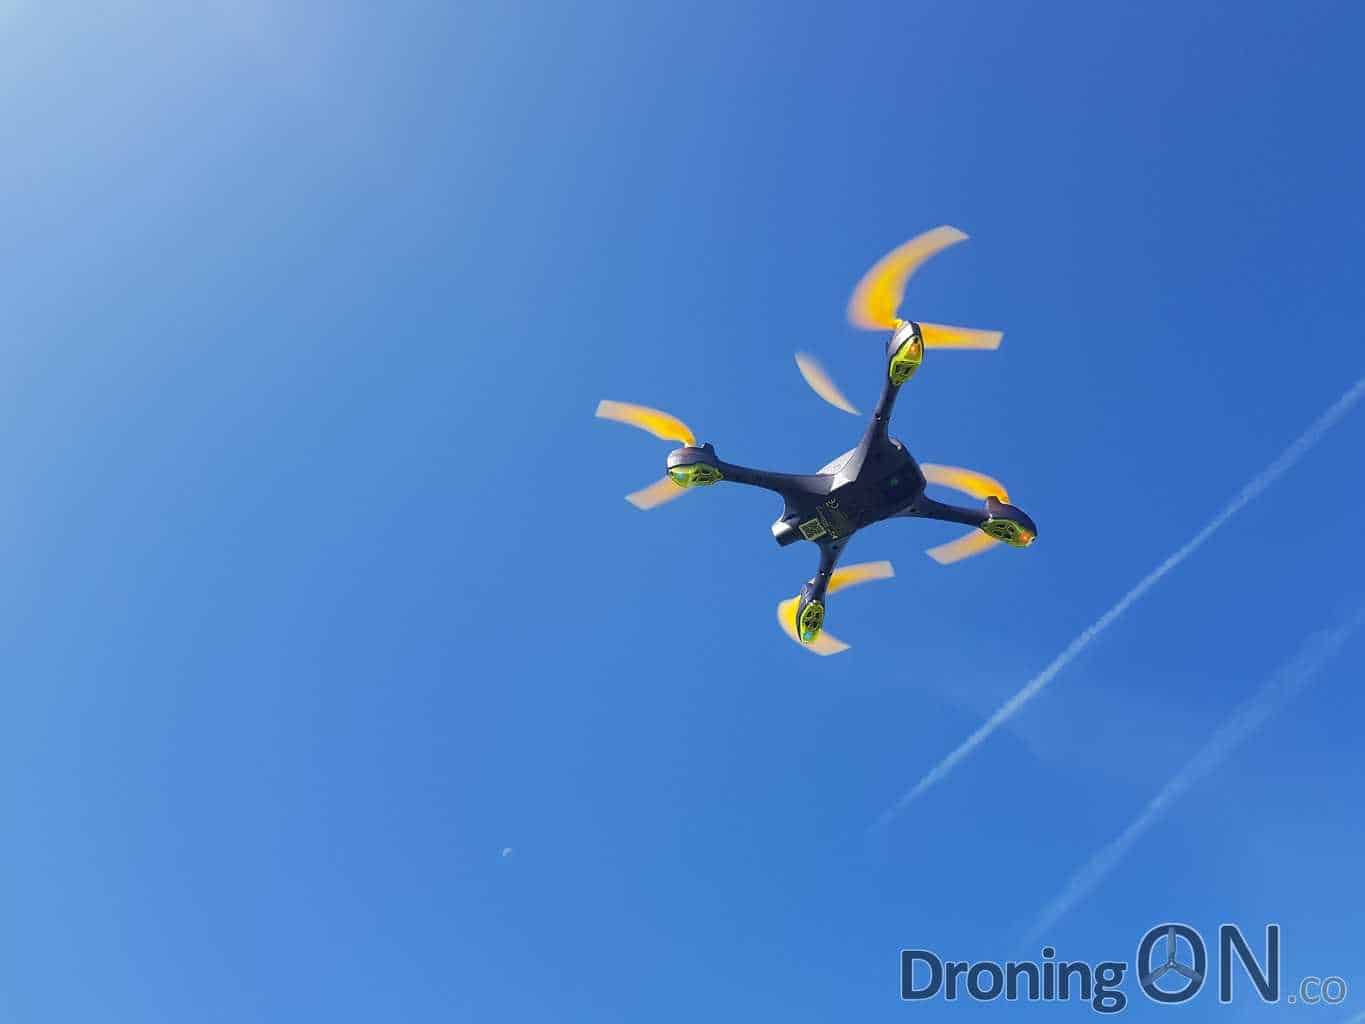 How to Repair corrupted or damaged Hubsan drone videos